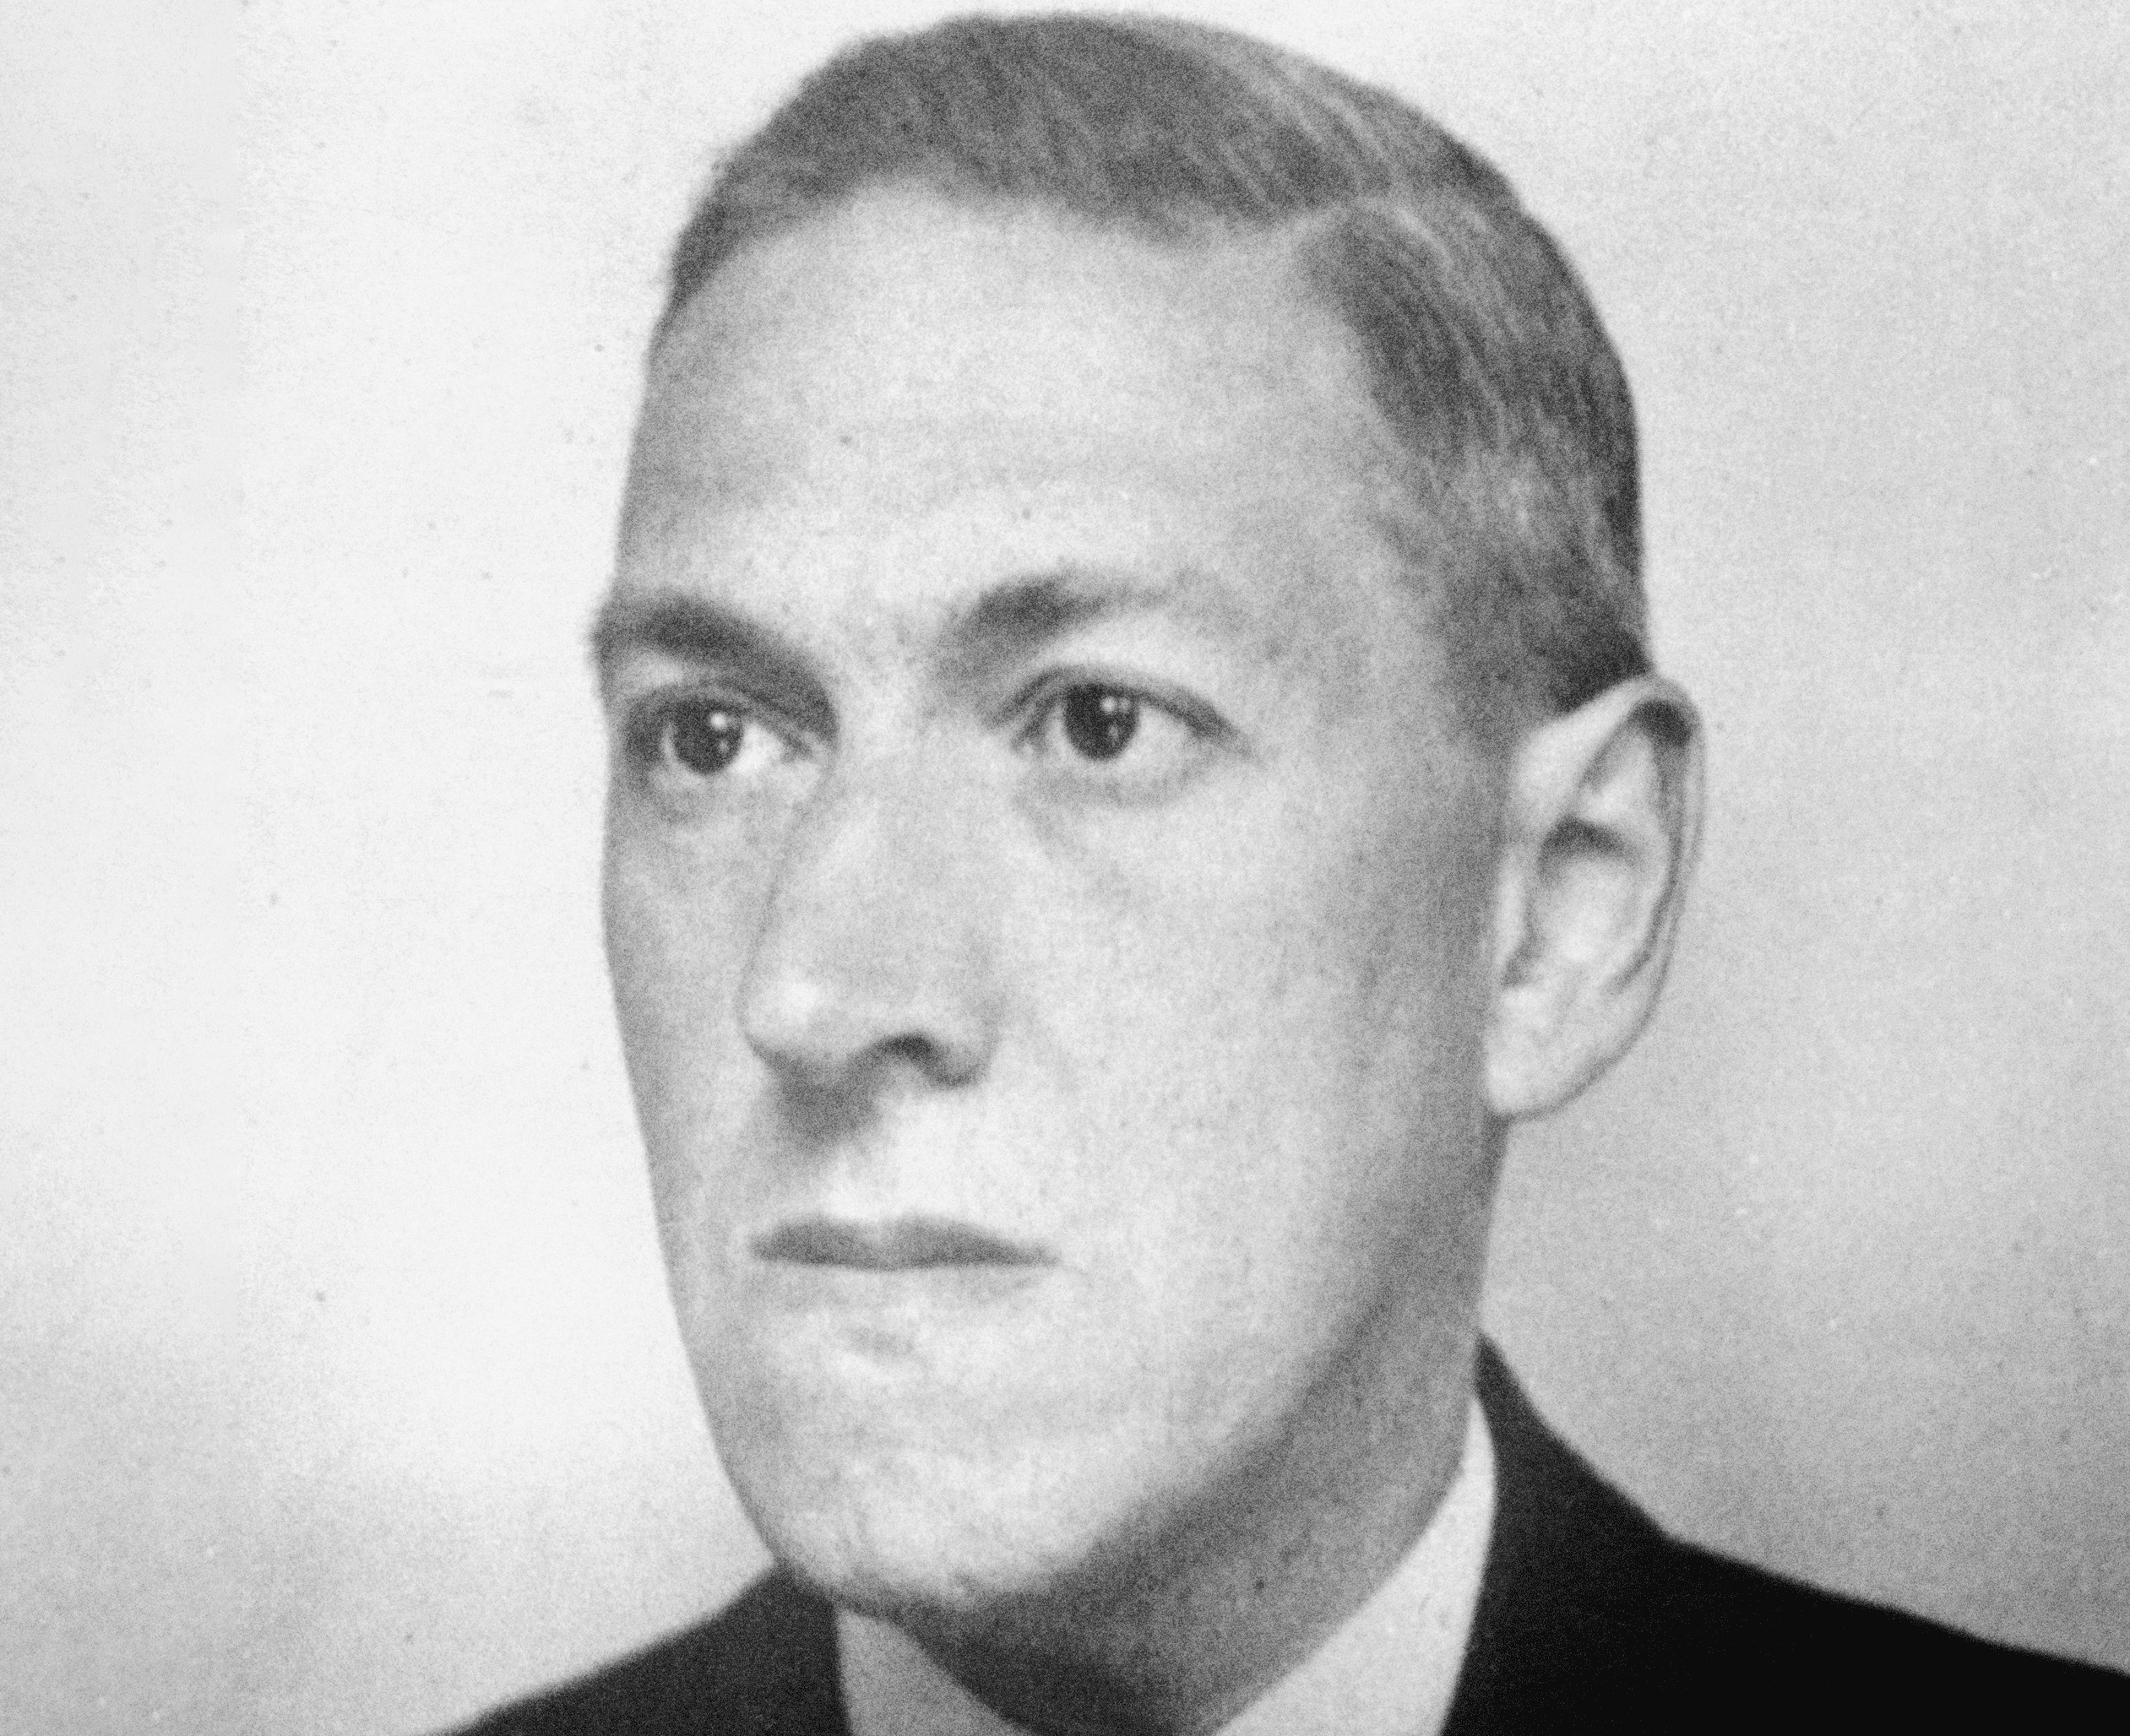 H. P. Lovecraft facts